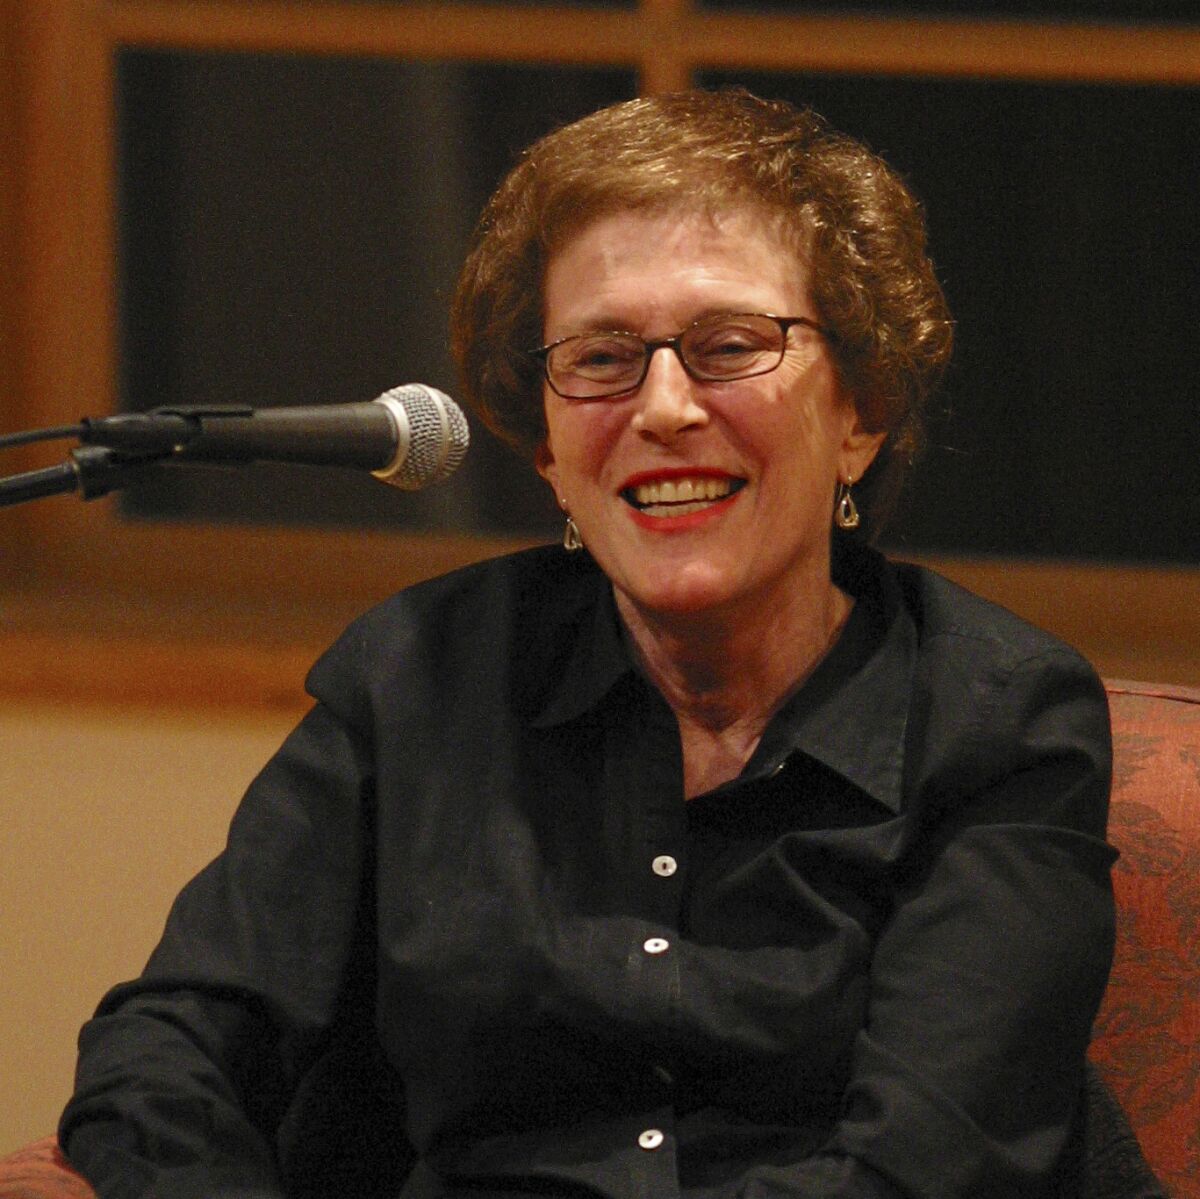 In this 2003 photo provided by Patricia Williams is Joan Micklin Silver as she is being interviewed by Kenneth Turan at the National Yiddish Book Center in Amherst, Mass. Silver, who forged a path for female directors in both independent and Hollywood films with movies including “Hester Street” and “Crossing Delancey,” has died at age 85. Silver died from vascular dementia on Thursday, Dec. 31, 2020, at her home in New York, her daughter Claudia Silver told The Associated Press. (Patricia Williams via AP)